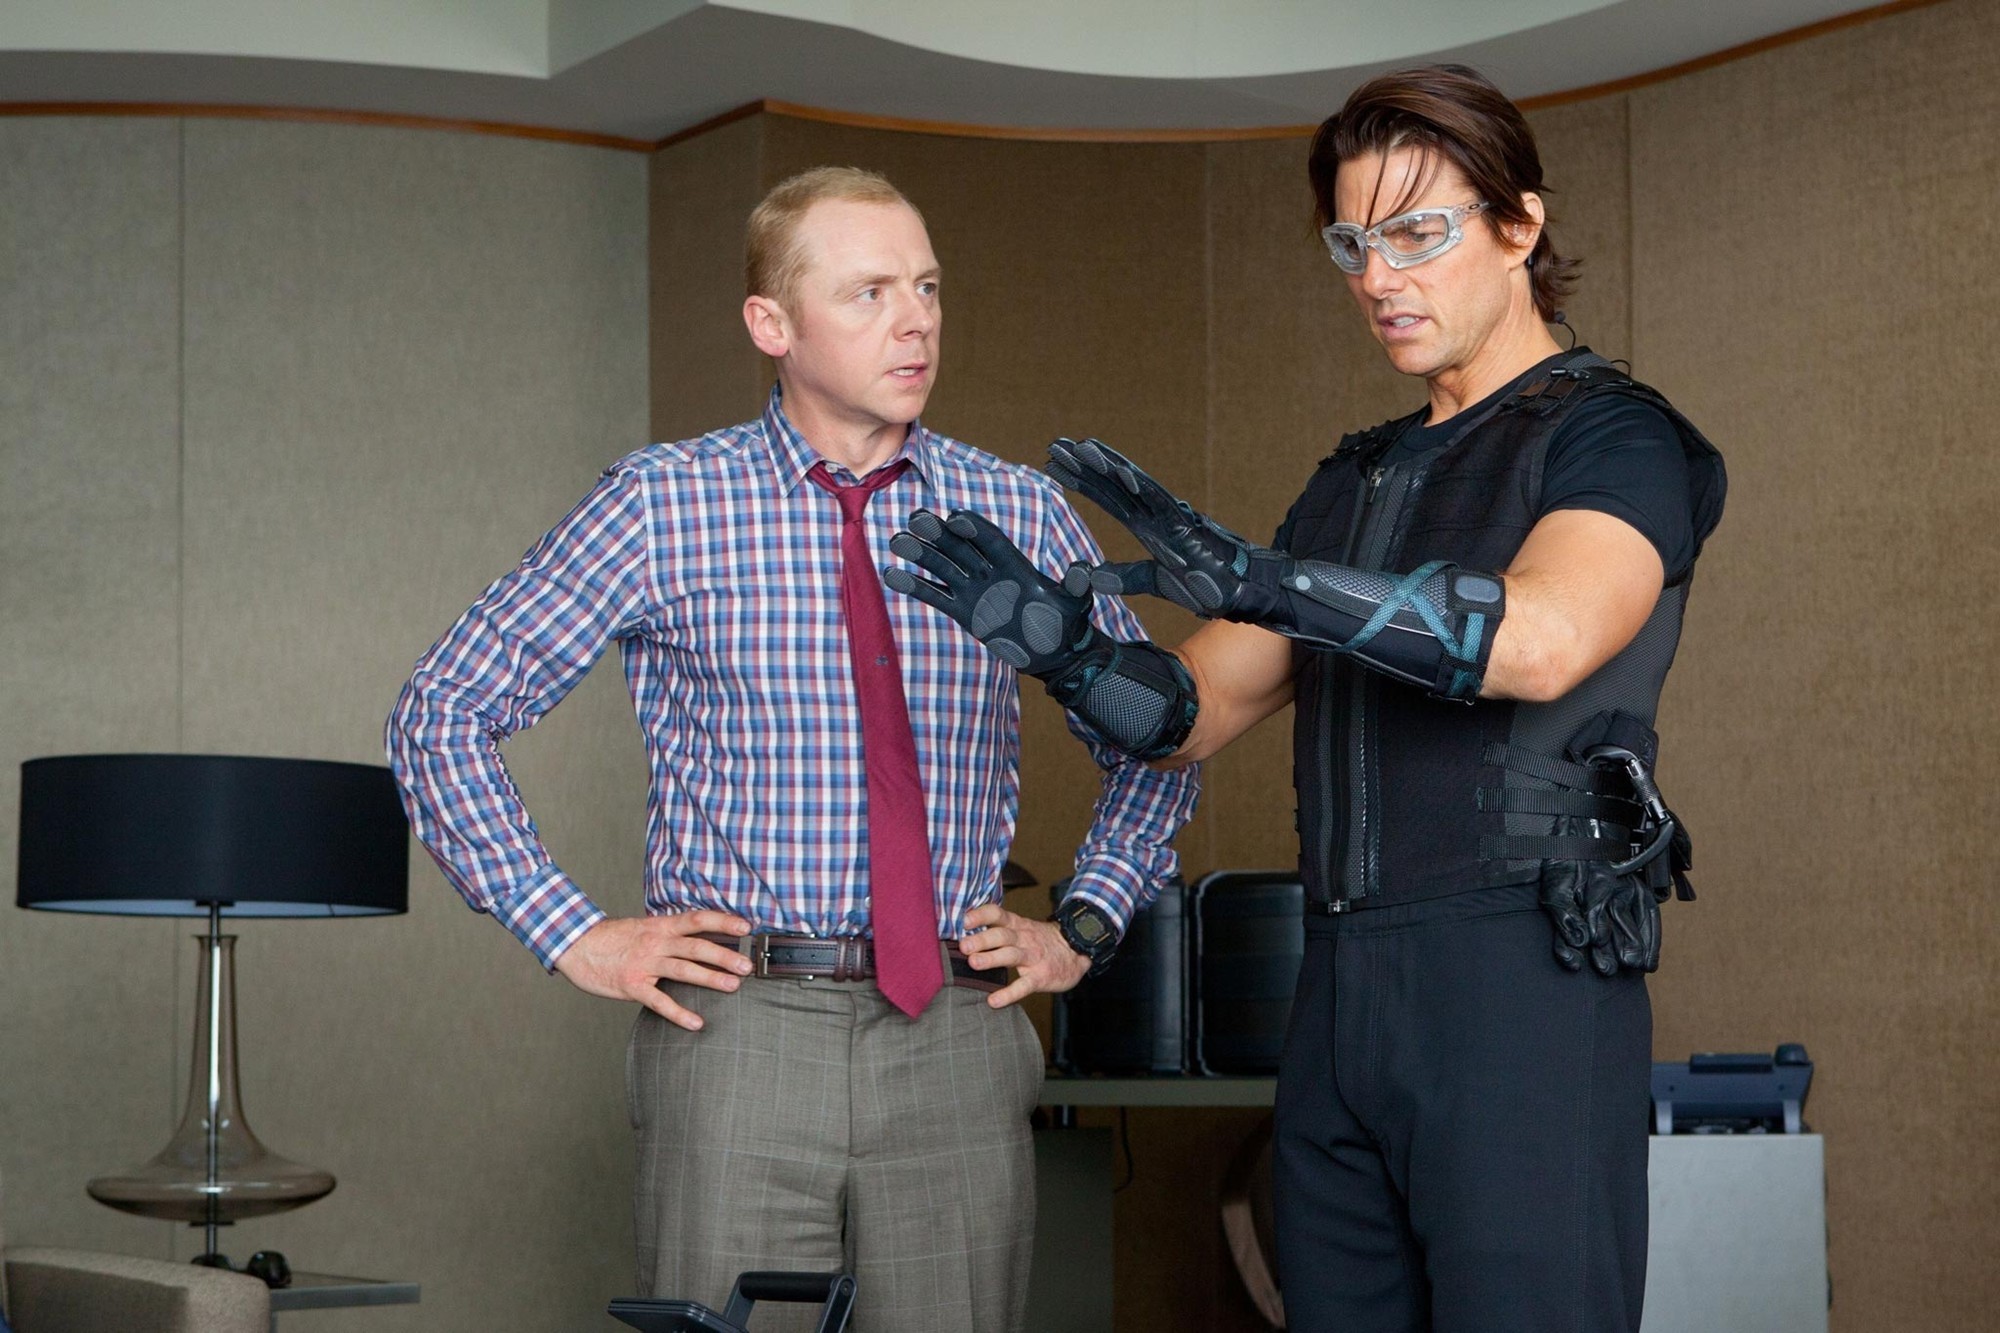 Simon Pegg stars as Benji Dunn and Tom Cruise stars as Ethan Hunt in Paramount Pictures' Mission: Impossible Ghost Protocol (2011)